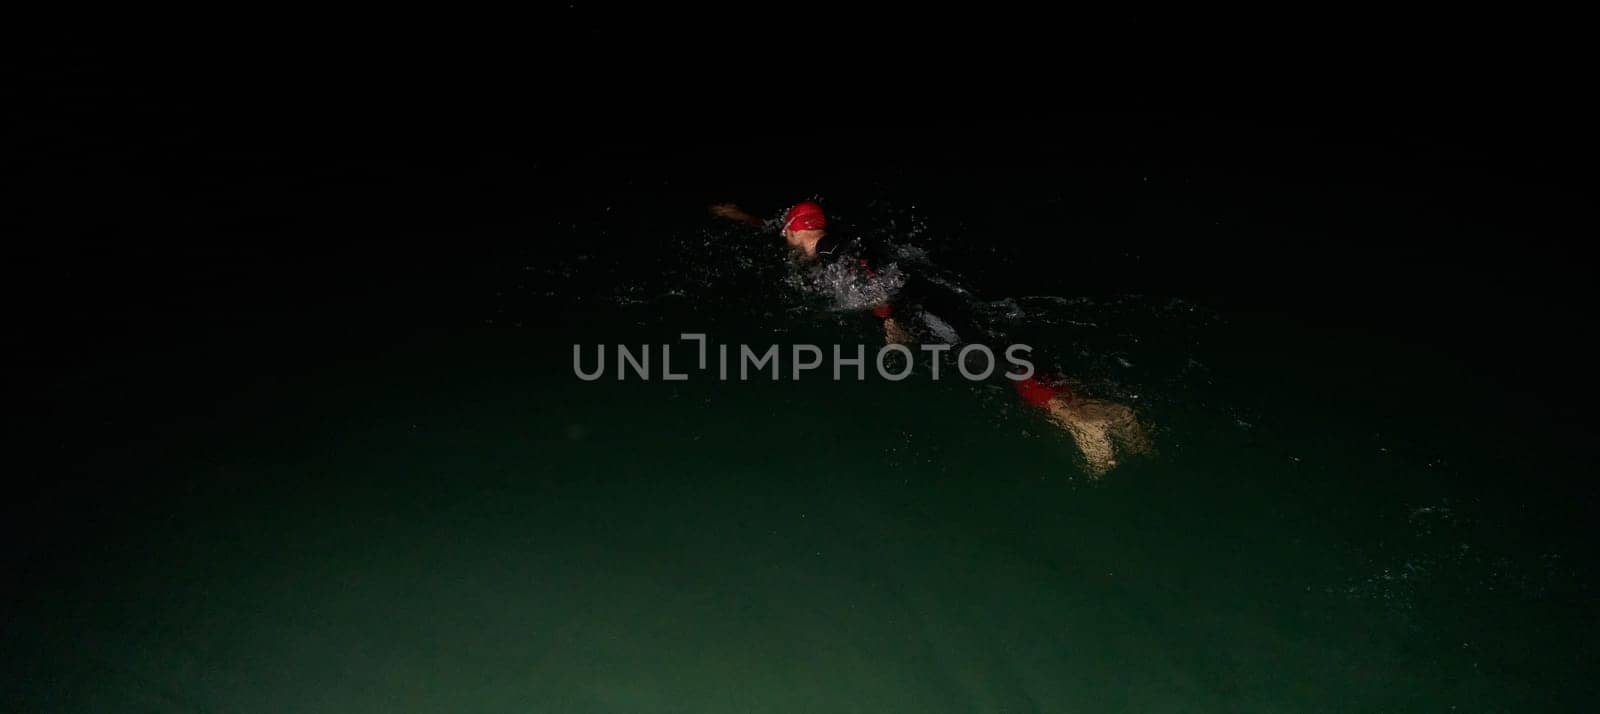 A determined professional triathlete undergoes rigorous night time training in cold waters, showcasing dedication and resilience in preparation for an upcoming triathlon swim competition by dotshock